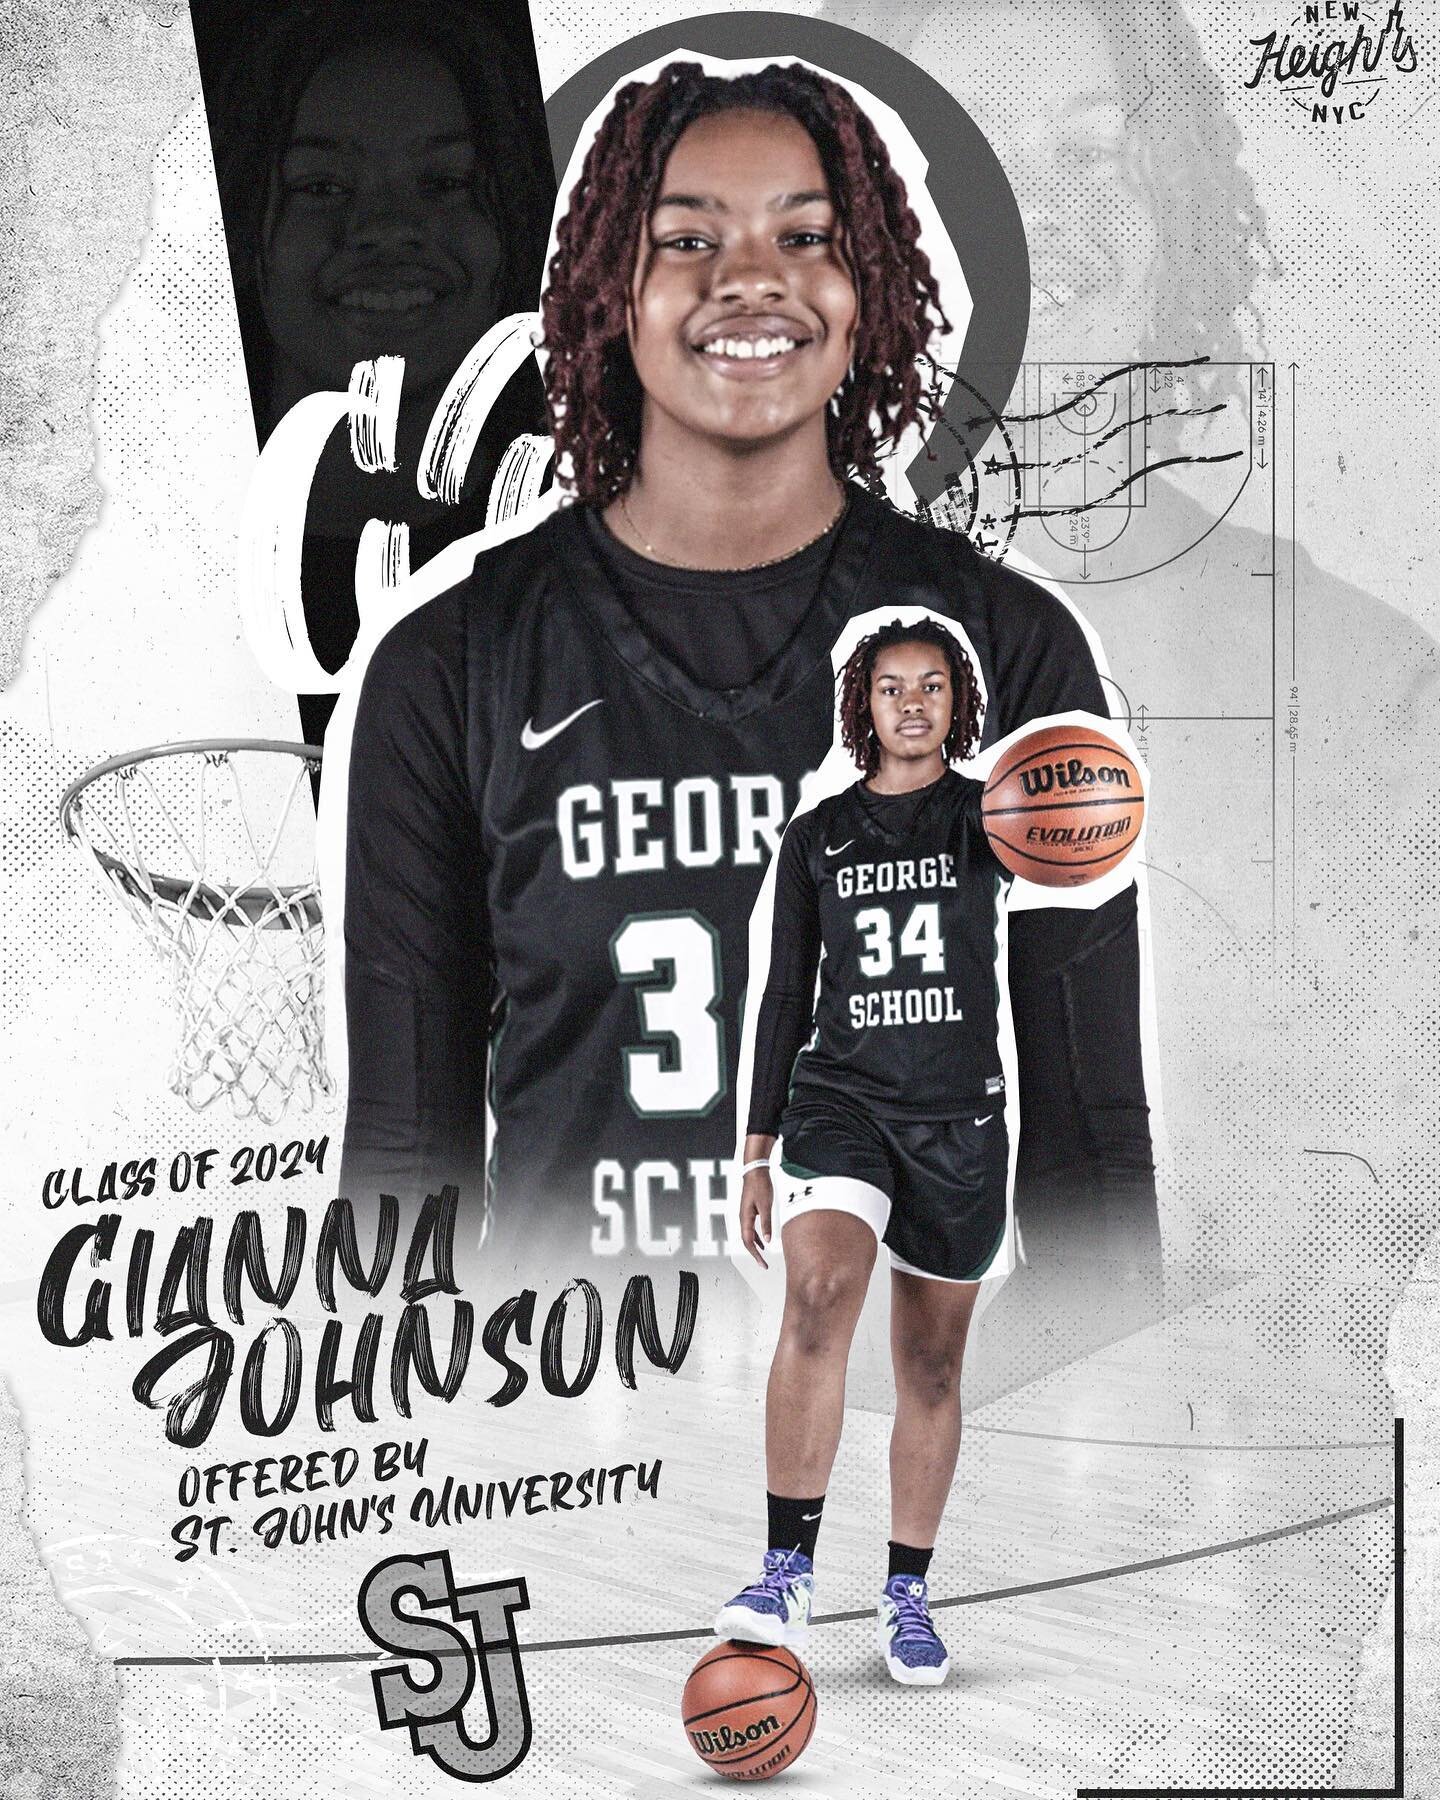 Shoutout to 2024 Post Gianna Johnson on recently picking up offers from St John&rsquo;s, Seton Hall and George Washington! Keep it going GiGi! 

#NEWHEIGHTSNYC⚪️🔵🔴